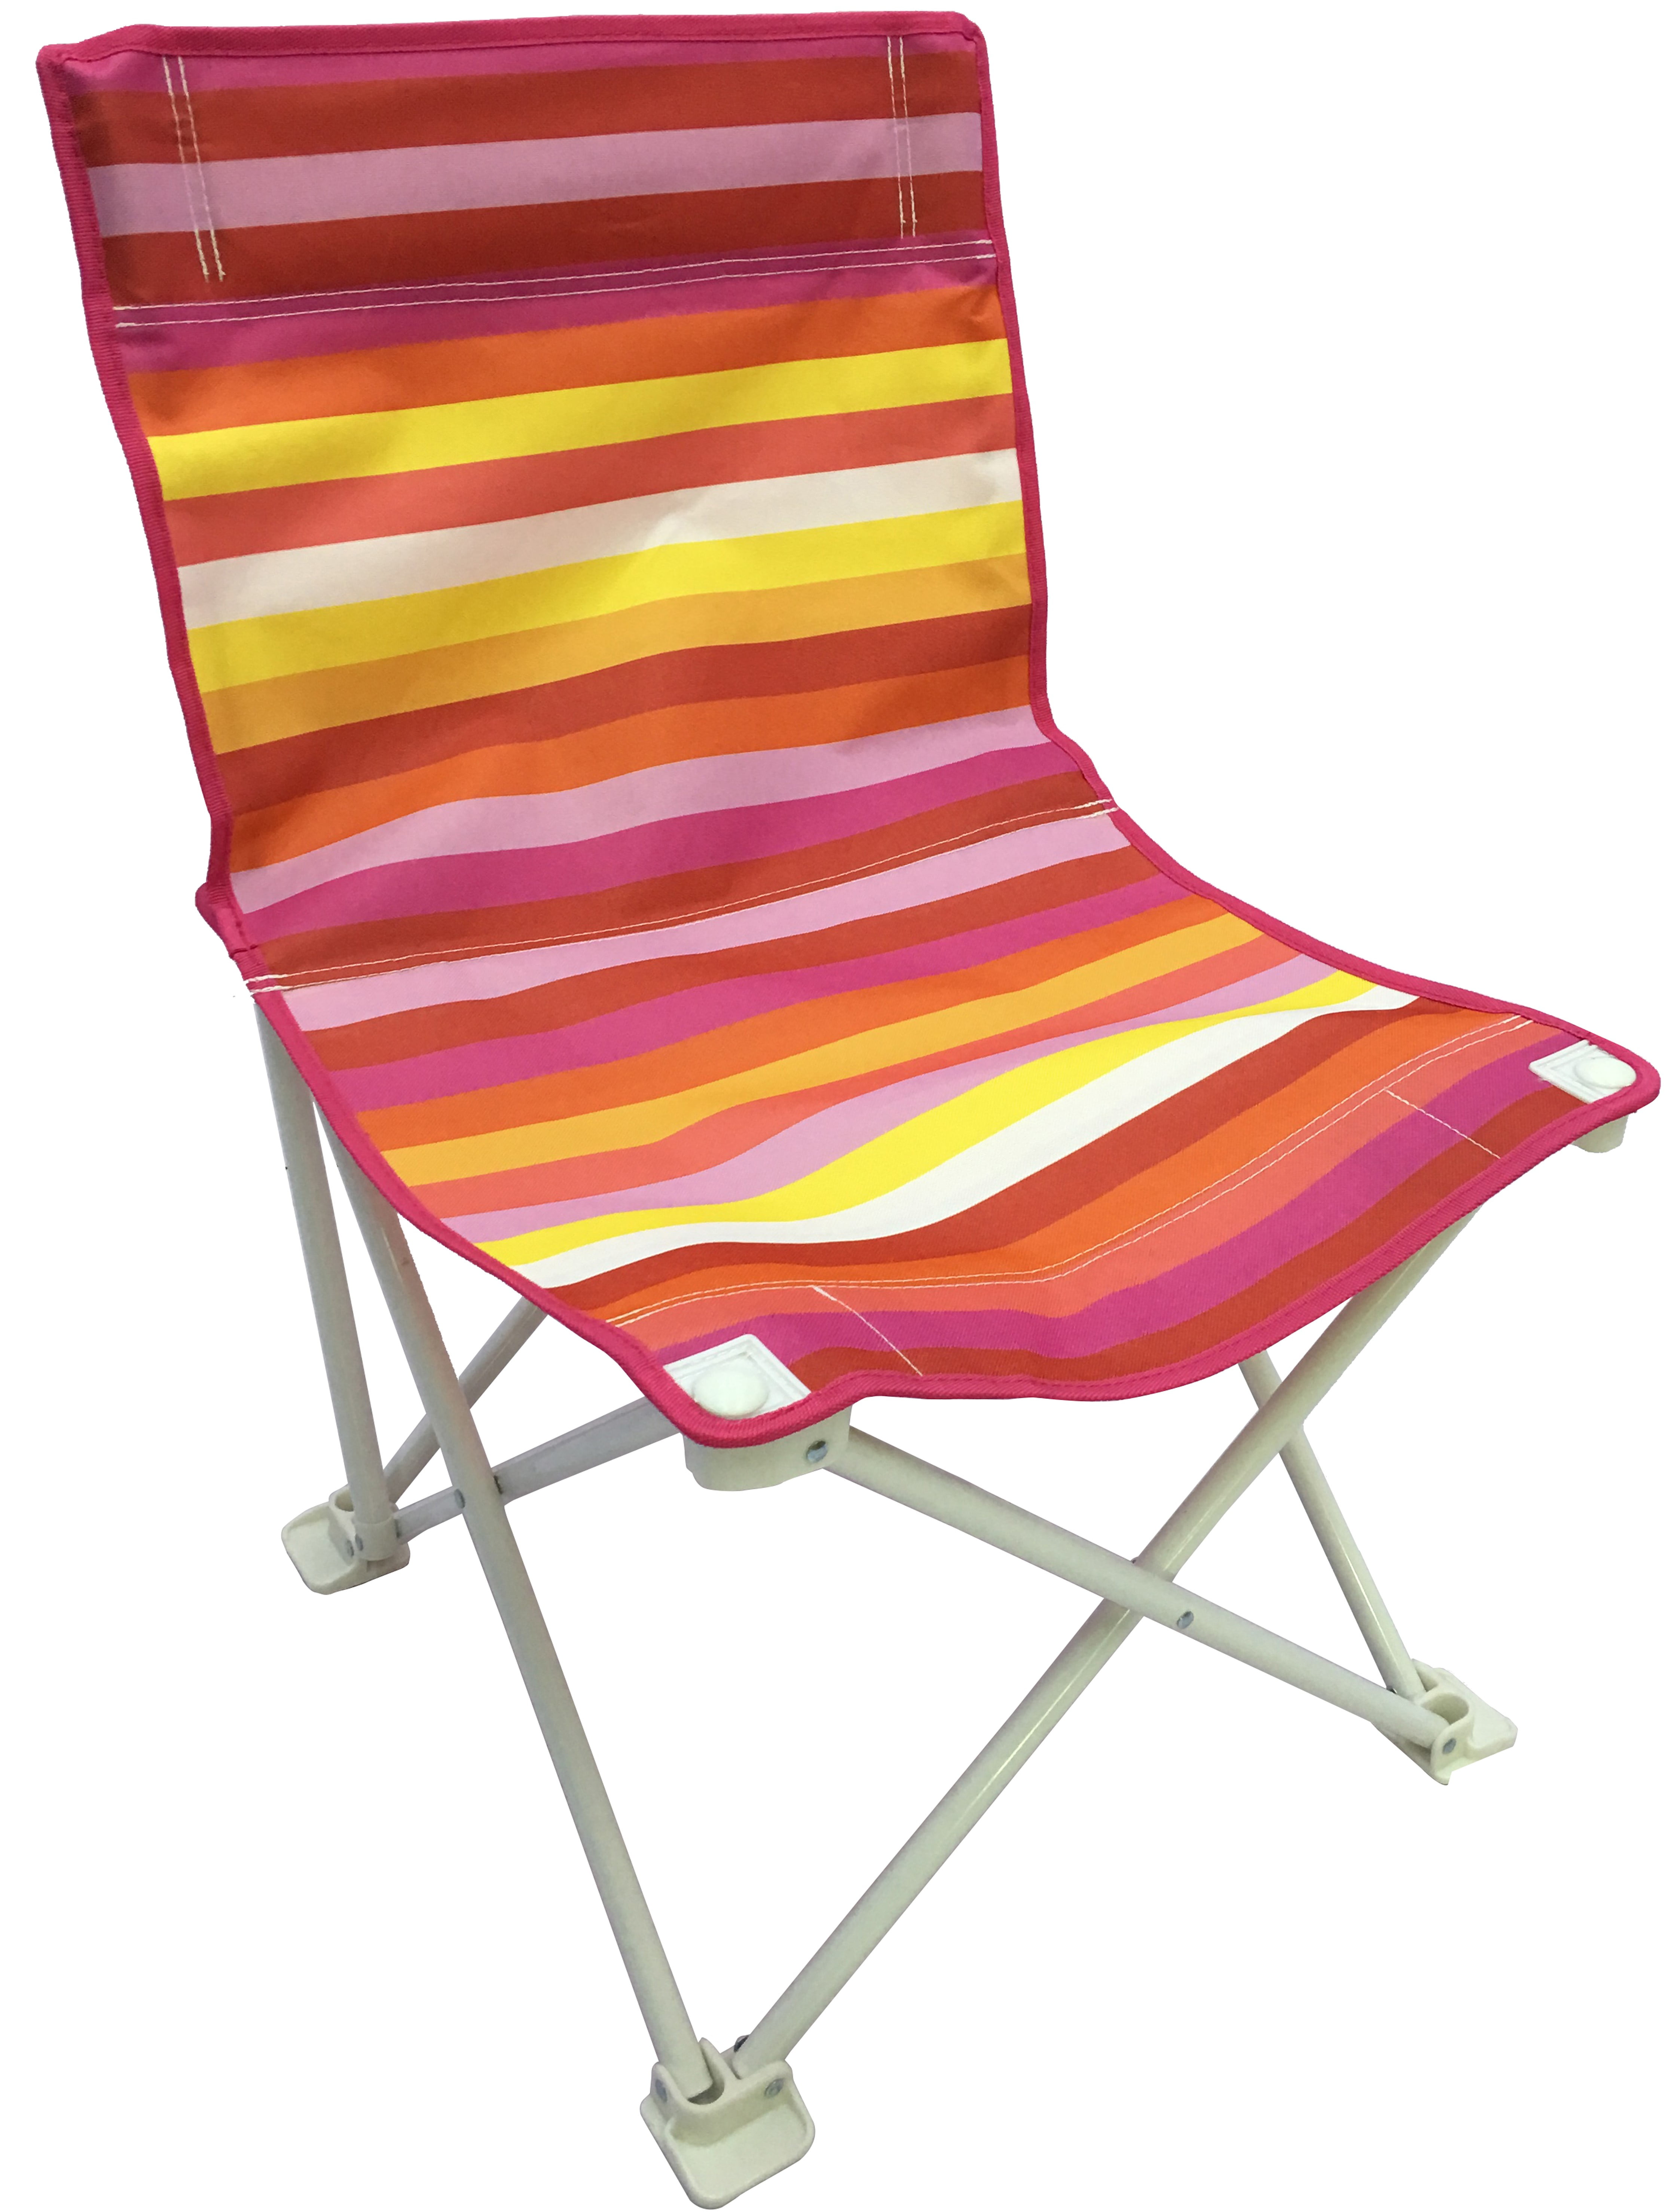 Modern Folding Beach Chair To Fit In Suitcase for Large Space